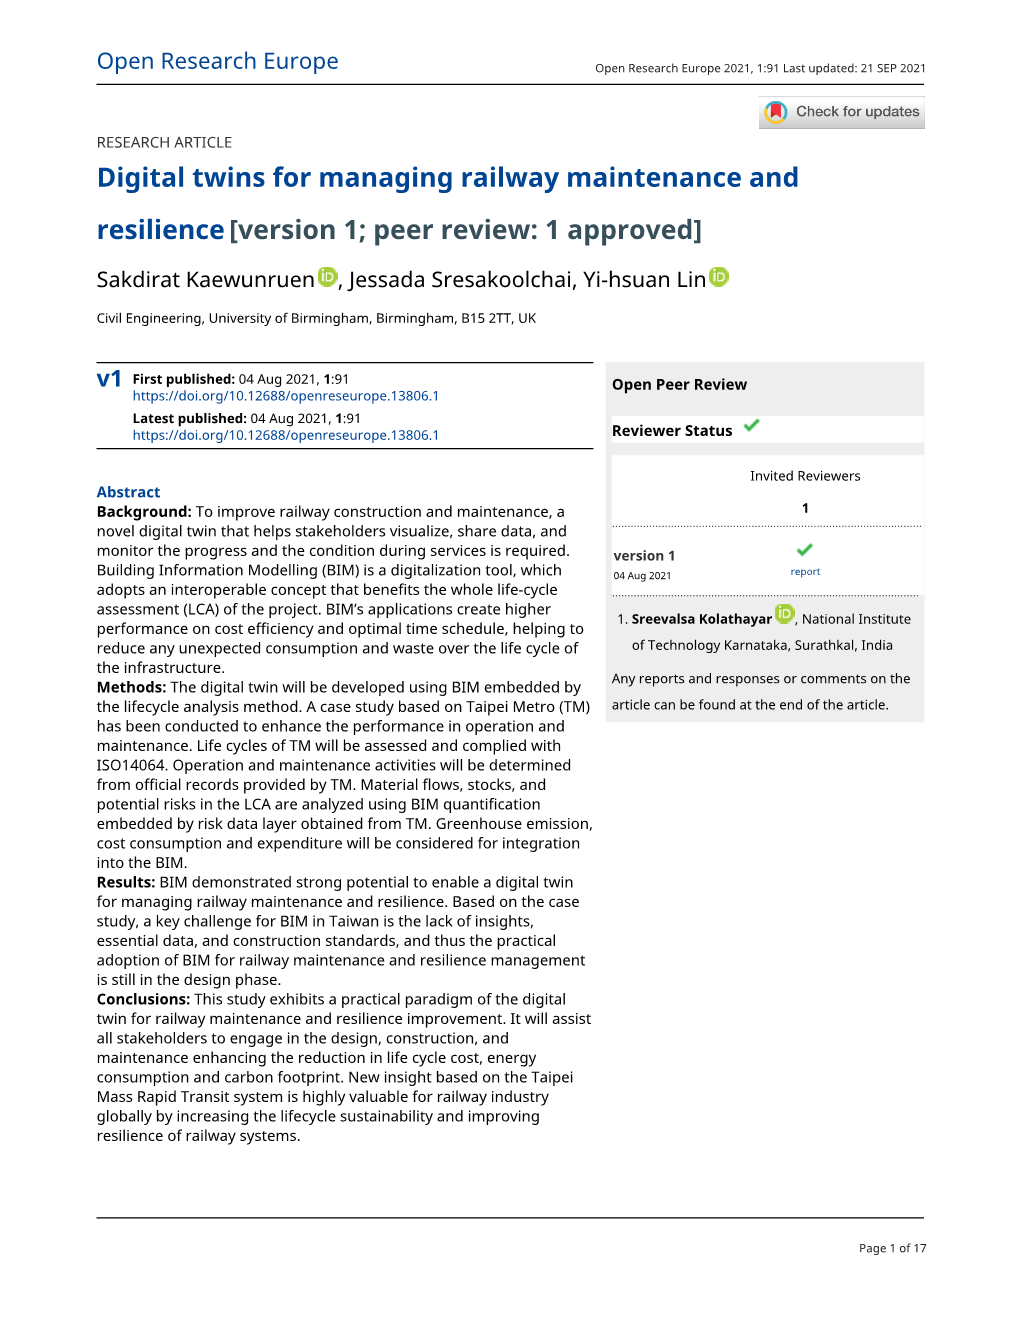 Digital Twins for Managing Railway Maintenance and Resilience[Version